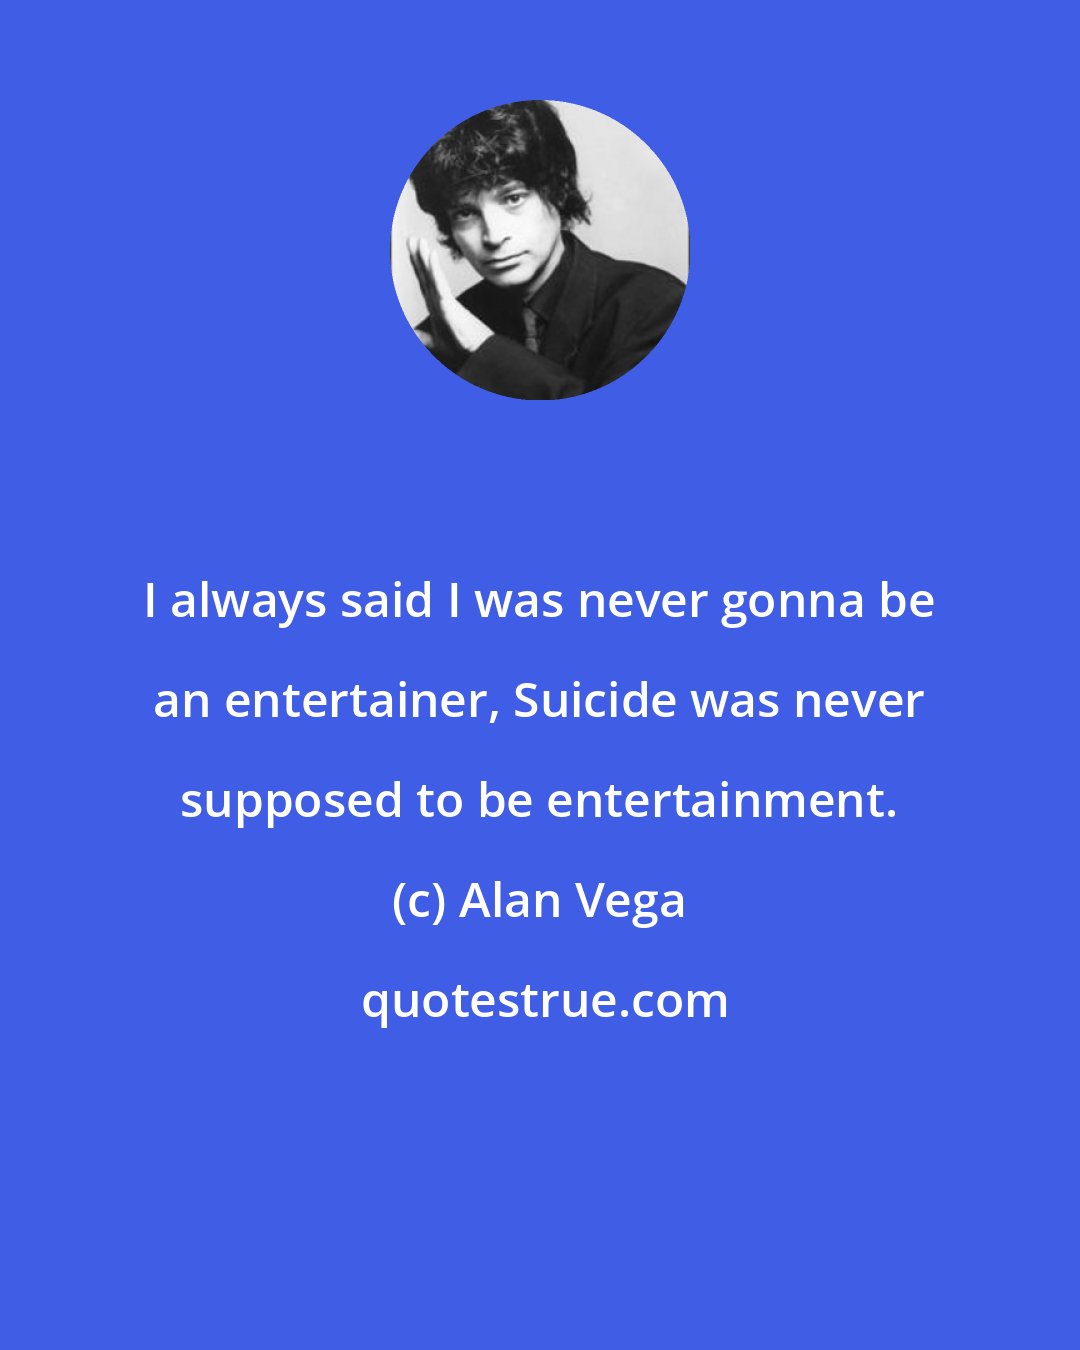 Alan Vega: I always said I was never gonna be an entertainer, Suicide was never supposed to be entertainment.